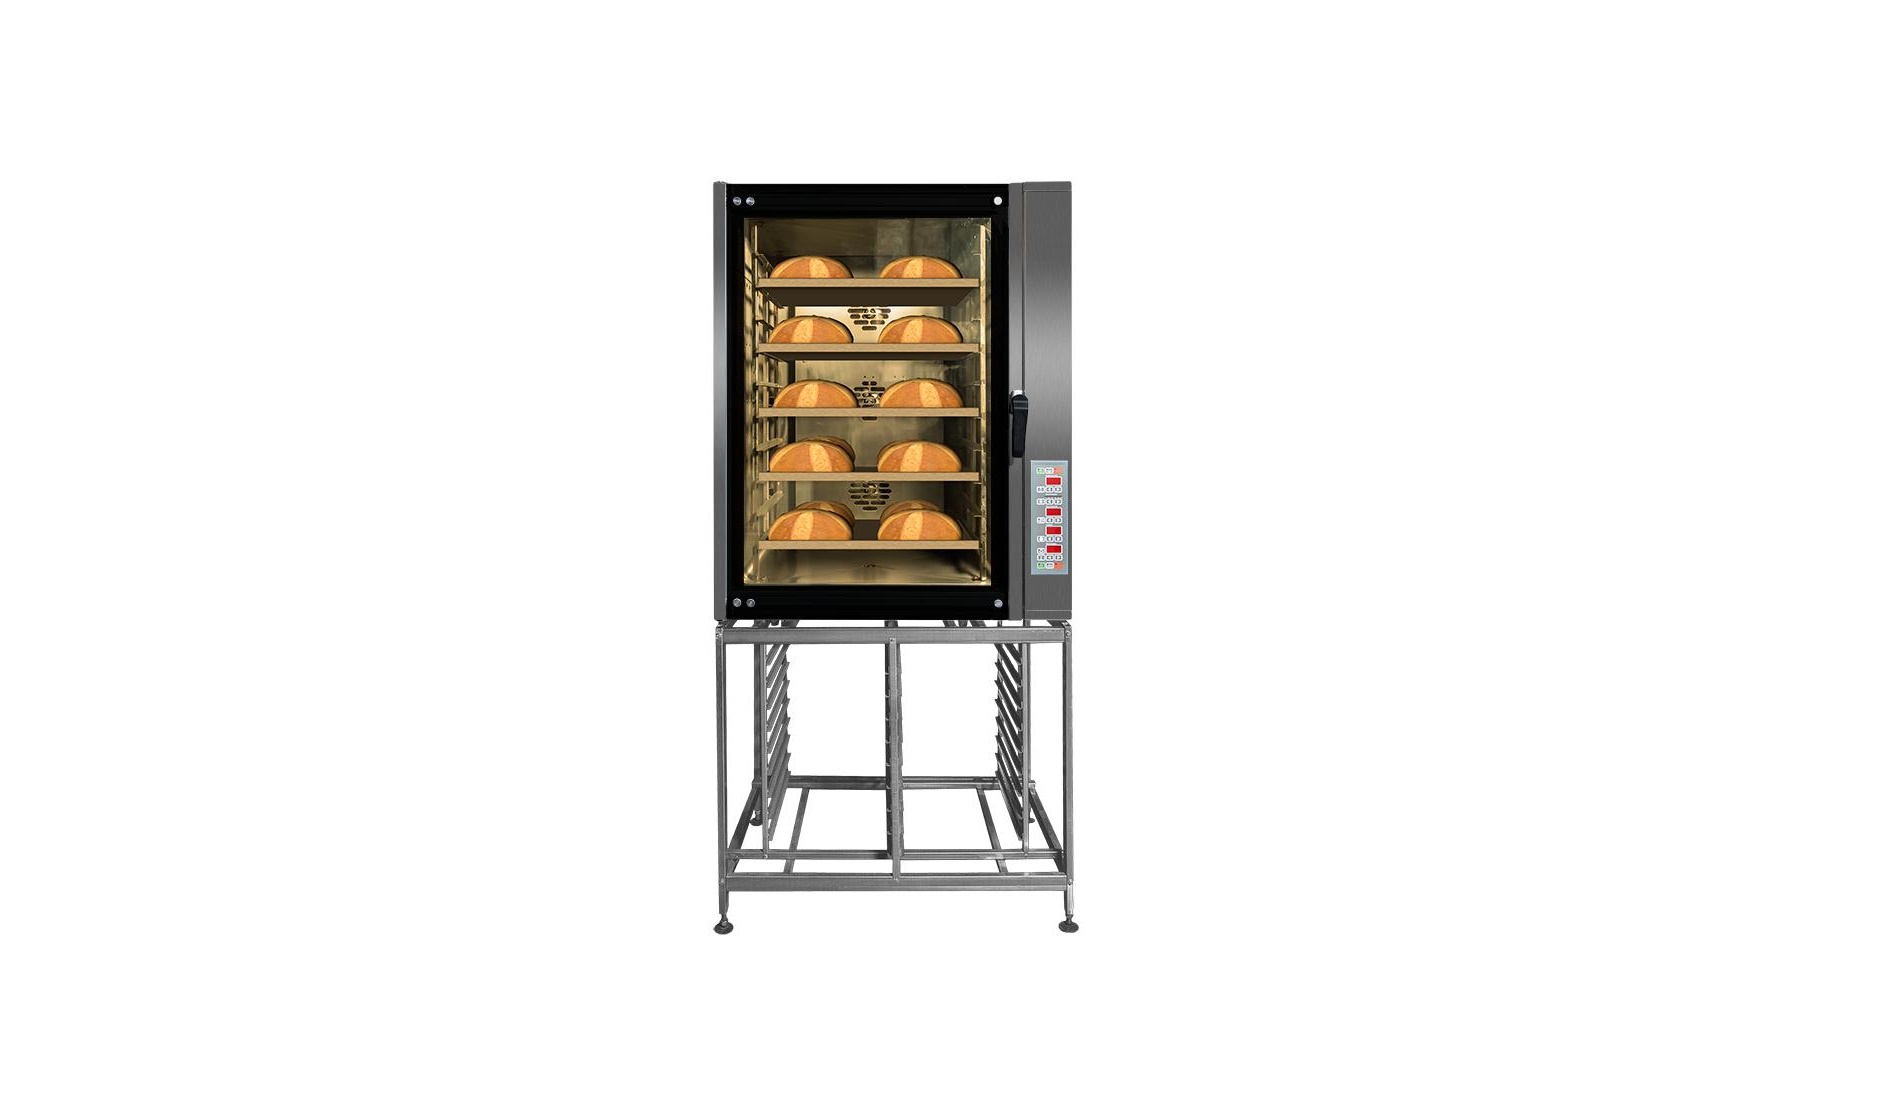 Convection oven PK-10